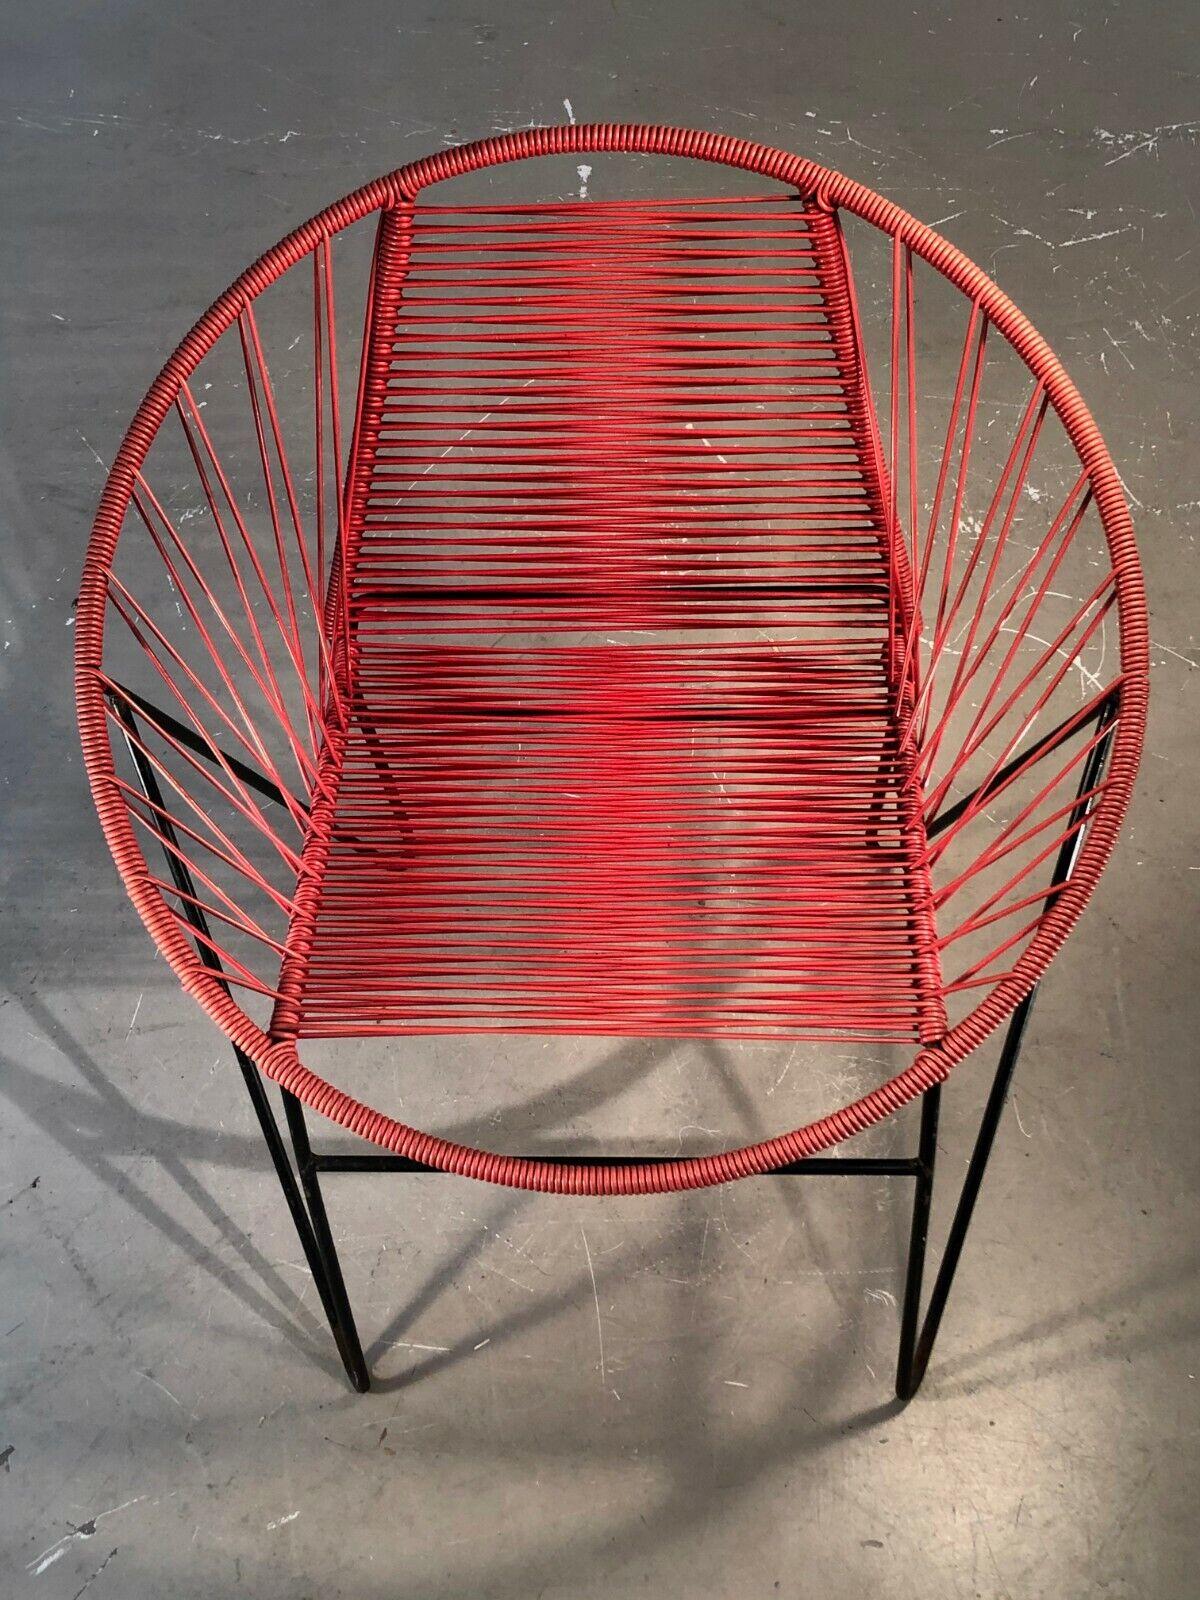 A MID-CENTURY-MODERN MODERNIST CHAIR Attributed to RAOUL GUYS, France 1950 For Sale 3